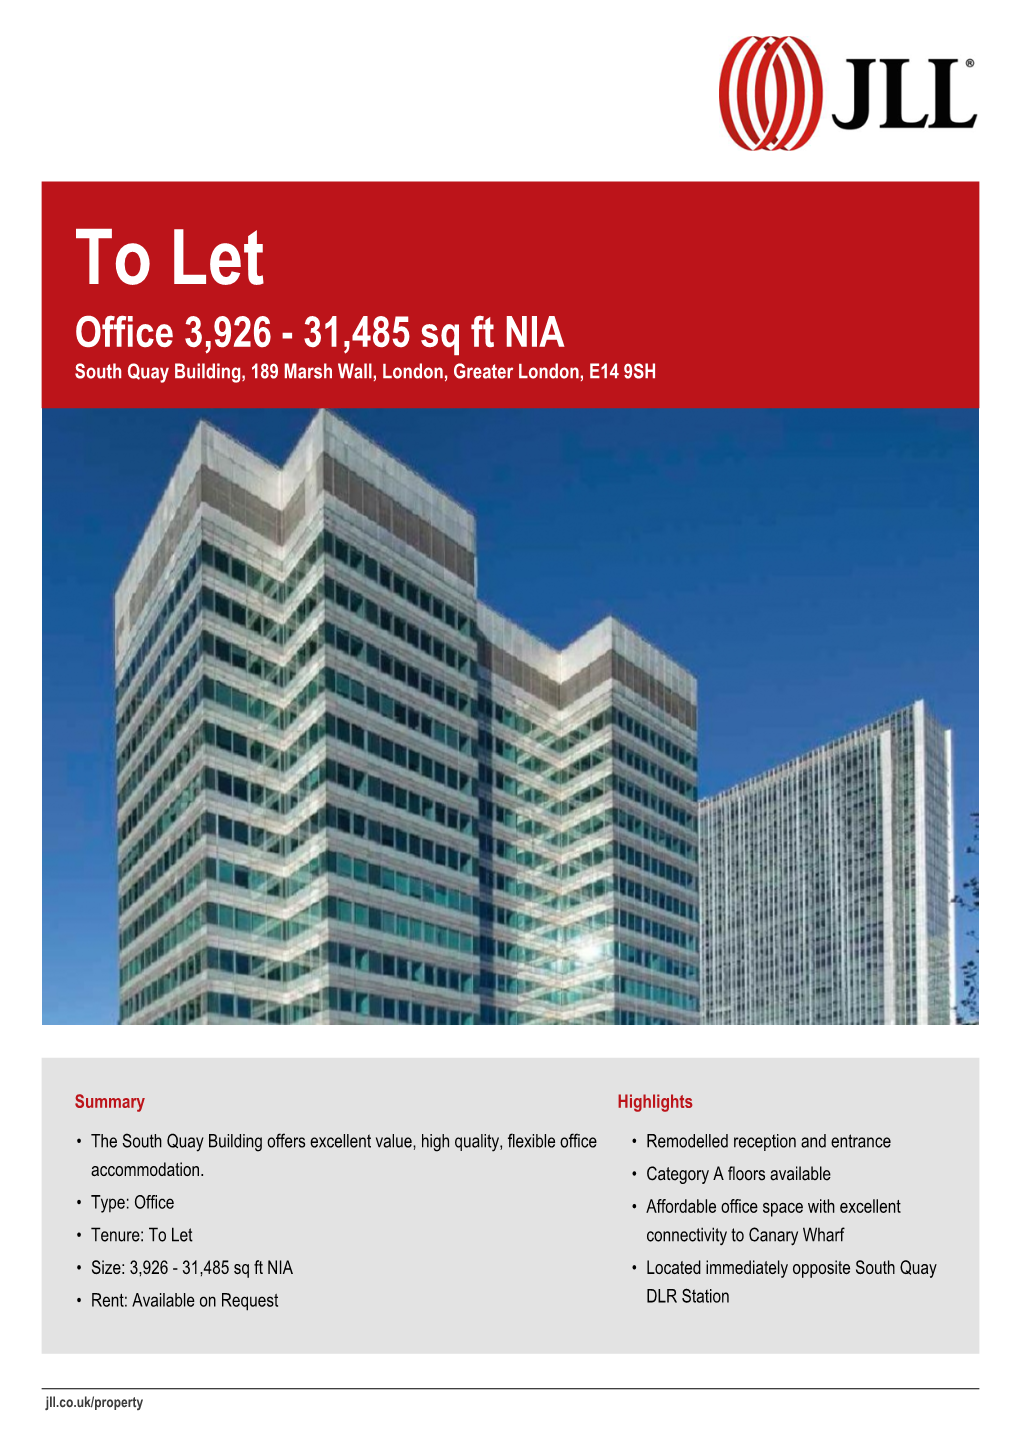 To Let Office 3,926 - 31,485 Sq Ft NIA South Quay Building, 189 Marsh Wall, London, Greater London, E14 9SH